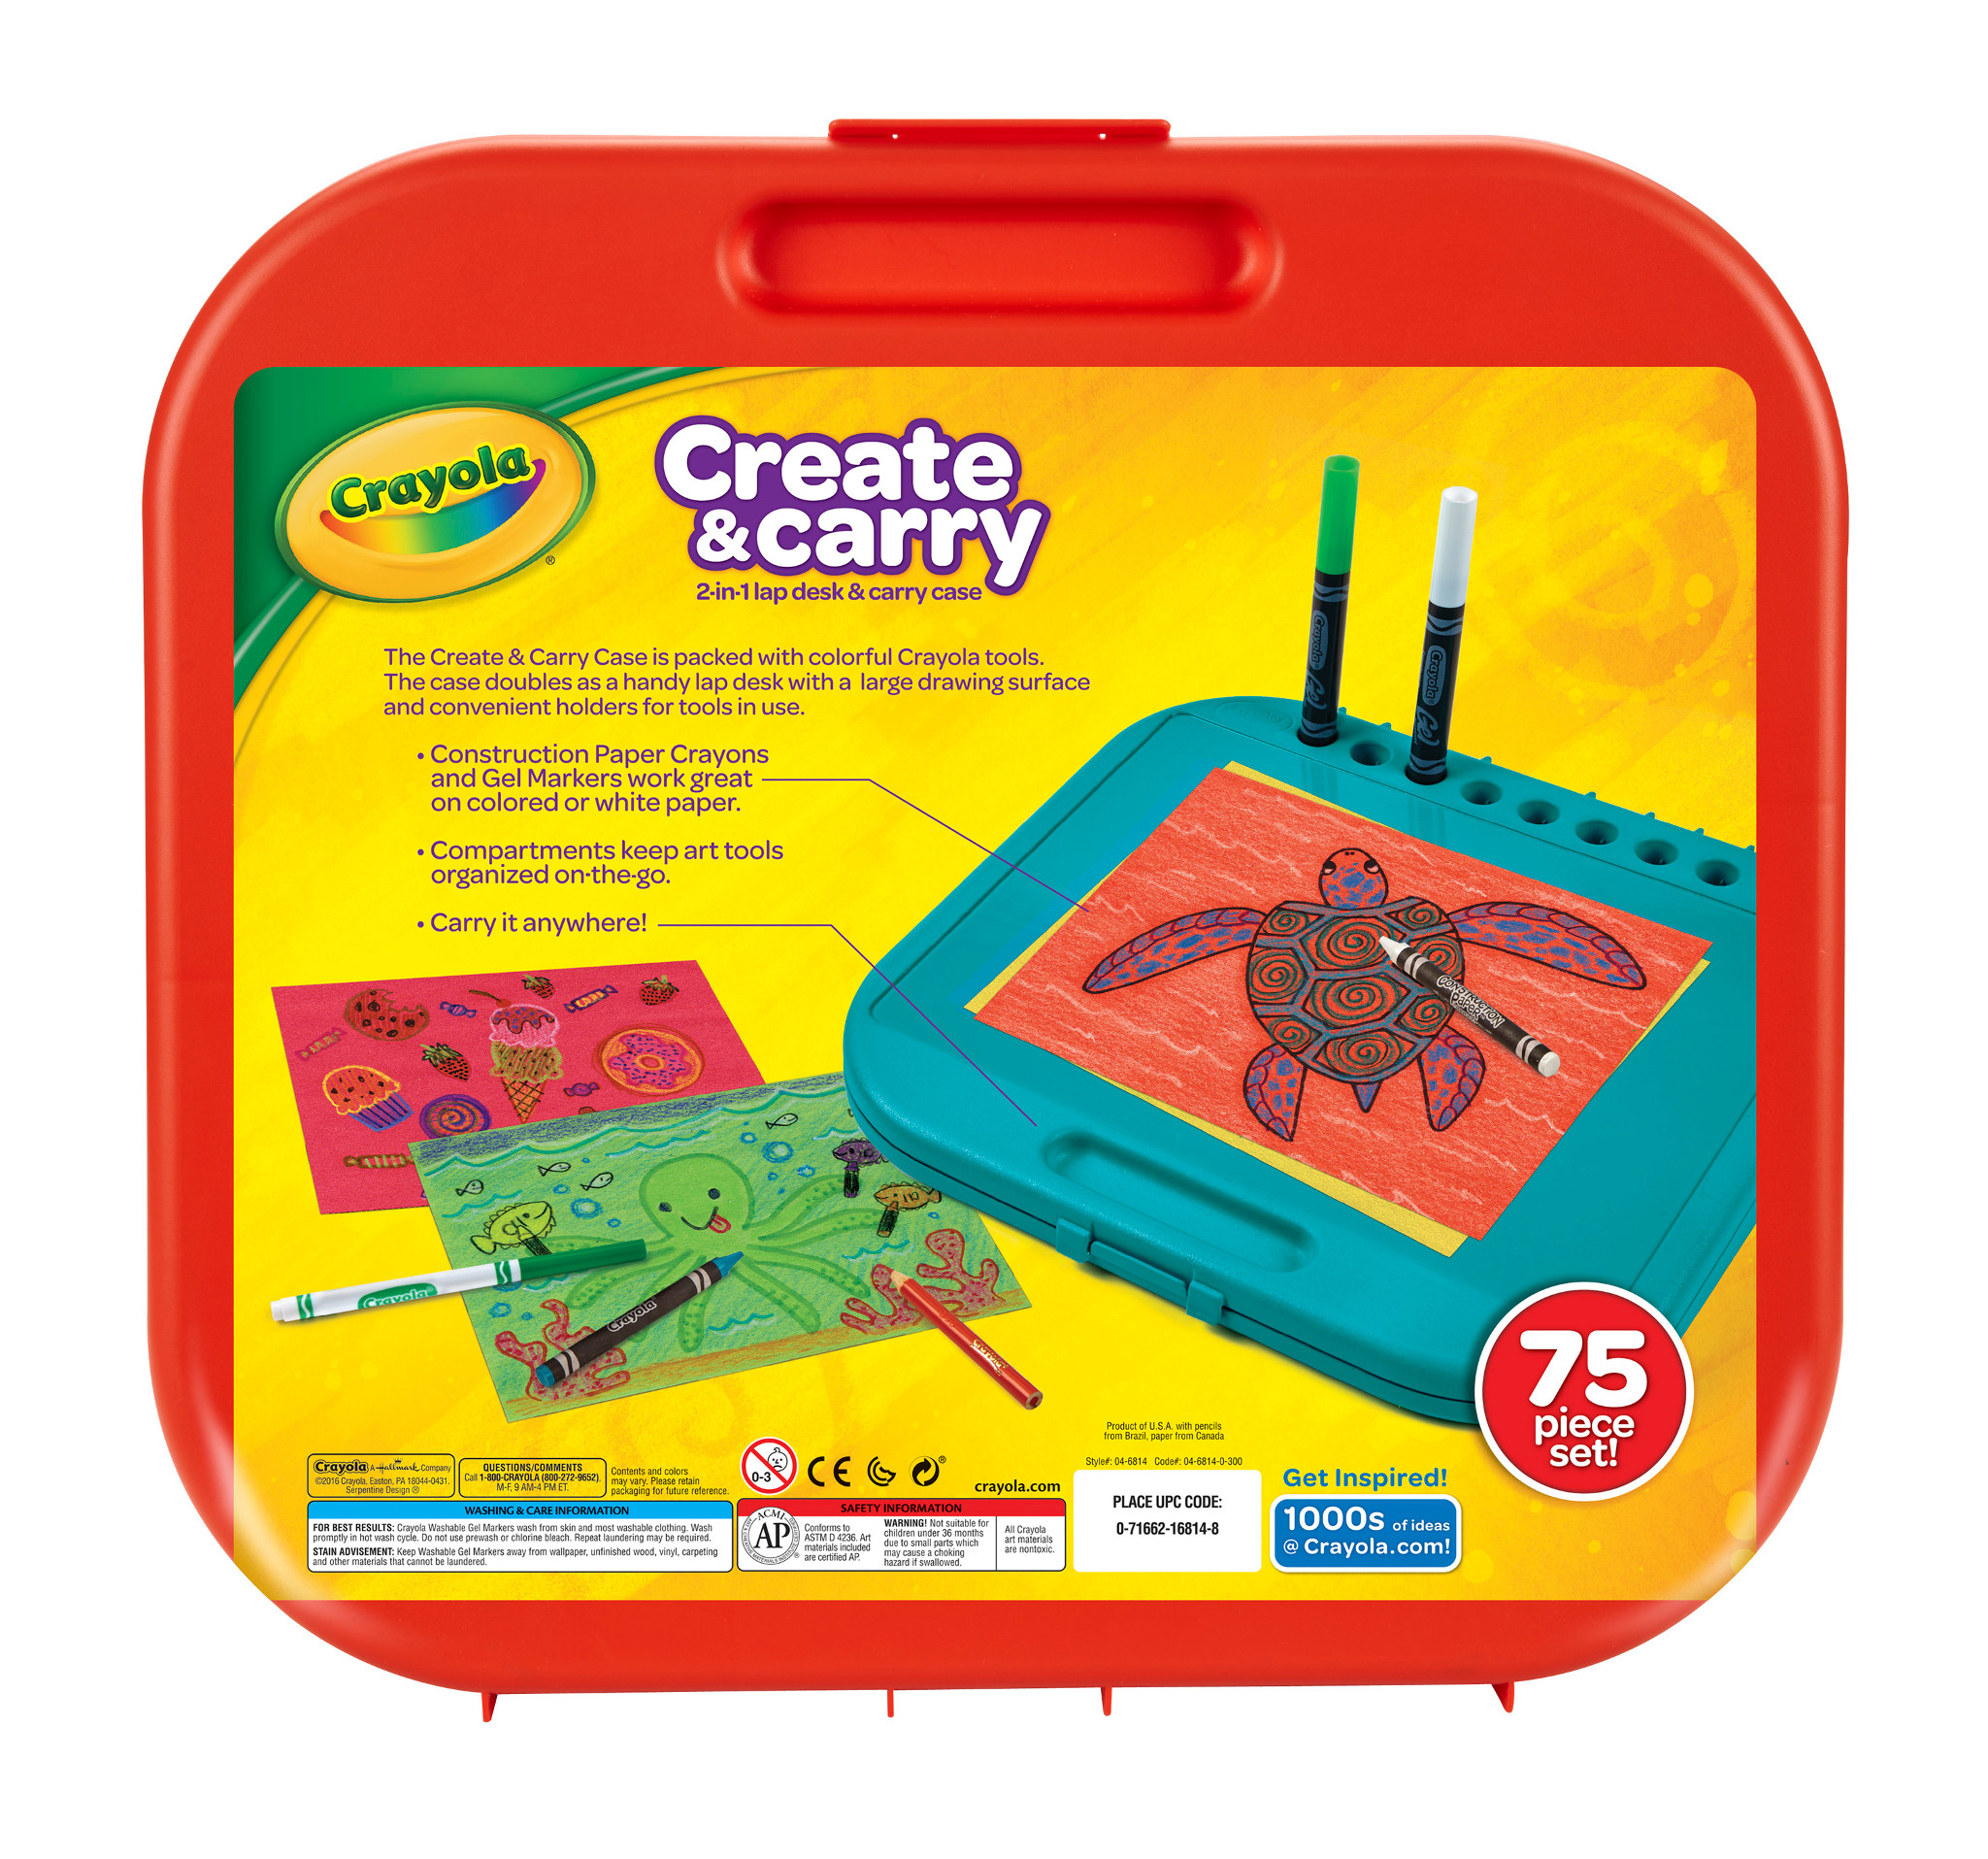 Crayola Create and Carry Art Coloring Set, Child Ages 5+, 75 Pieces - image 2 of 8